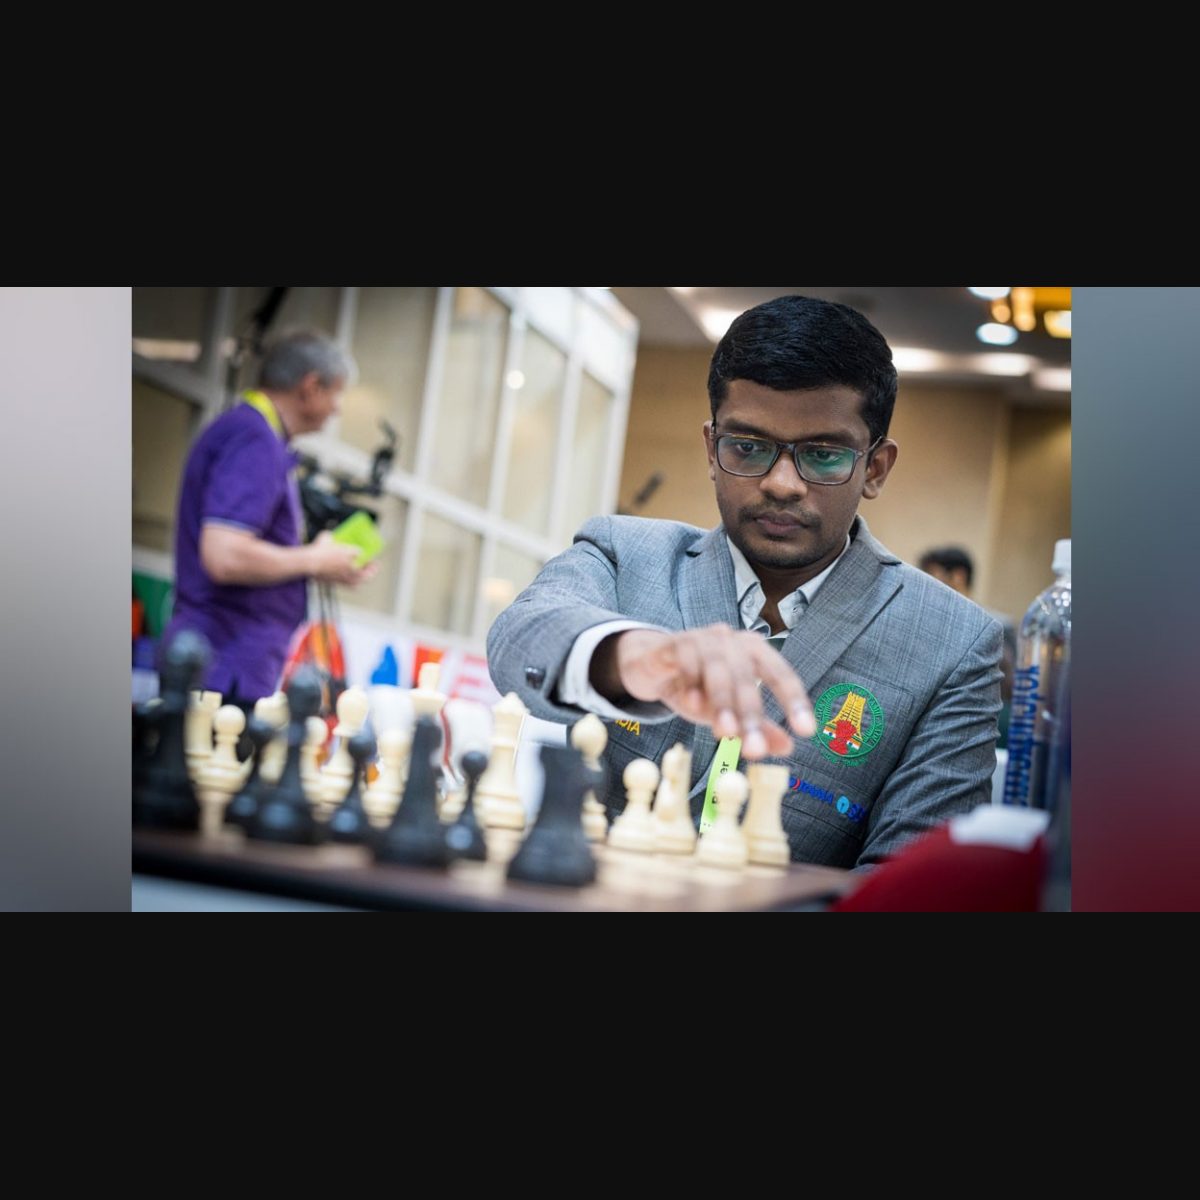 Chess Olympiad: Indian teams off to winning starts - Rediff.com